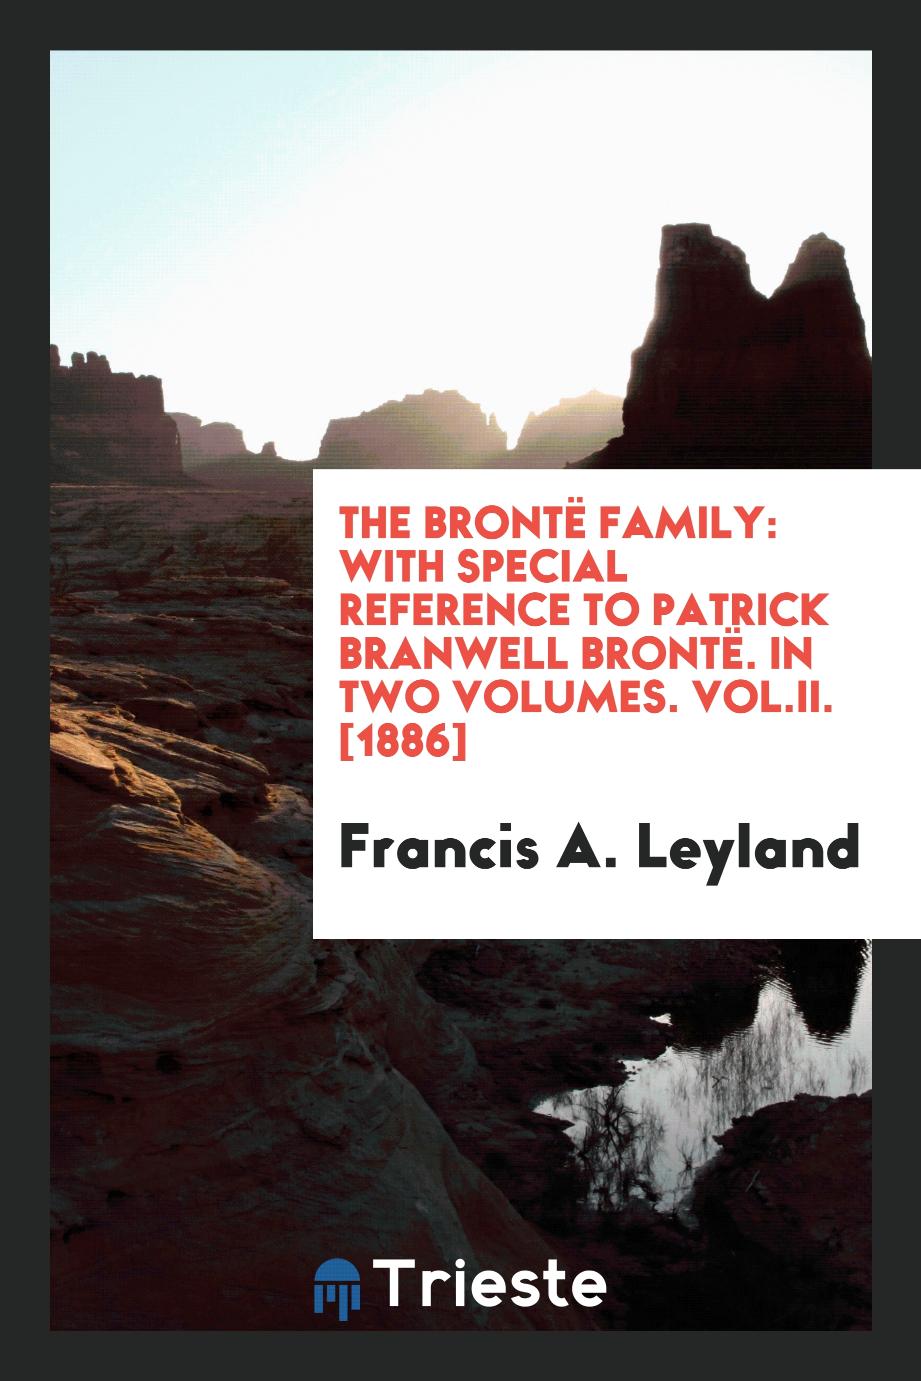 The Brontë Family: With Special Reference to Patrick Branwell Brontë. In Two Volumes. Vol.II. [1886]